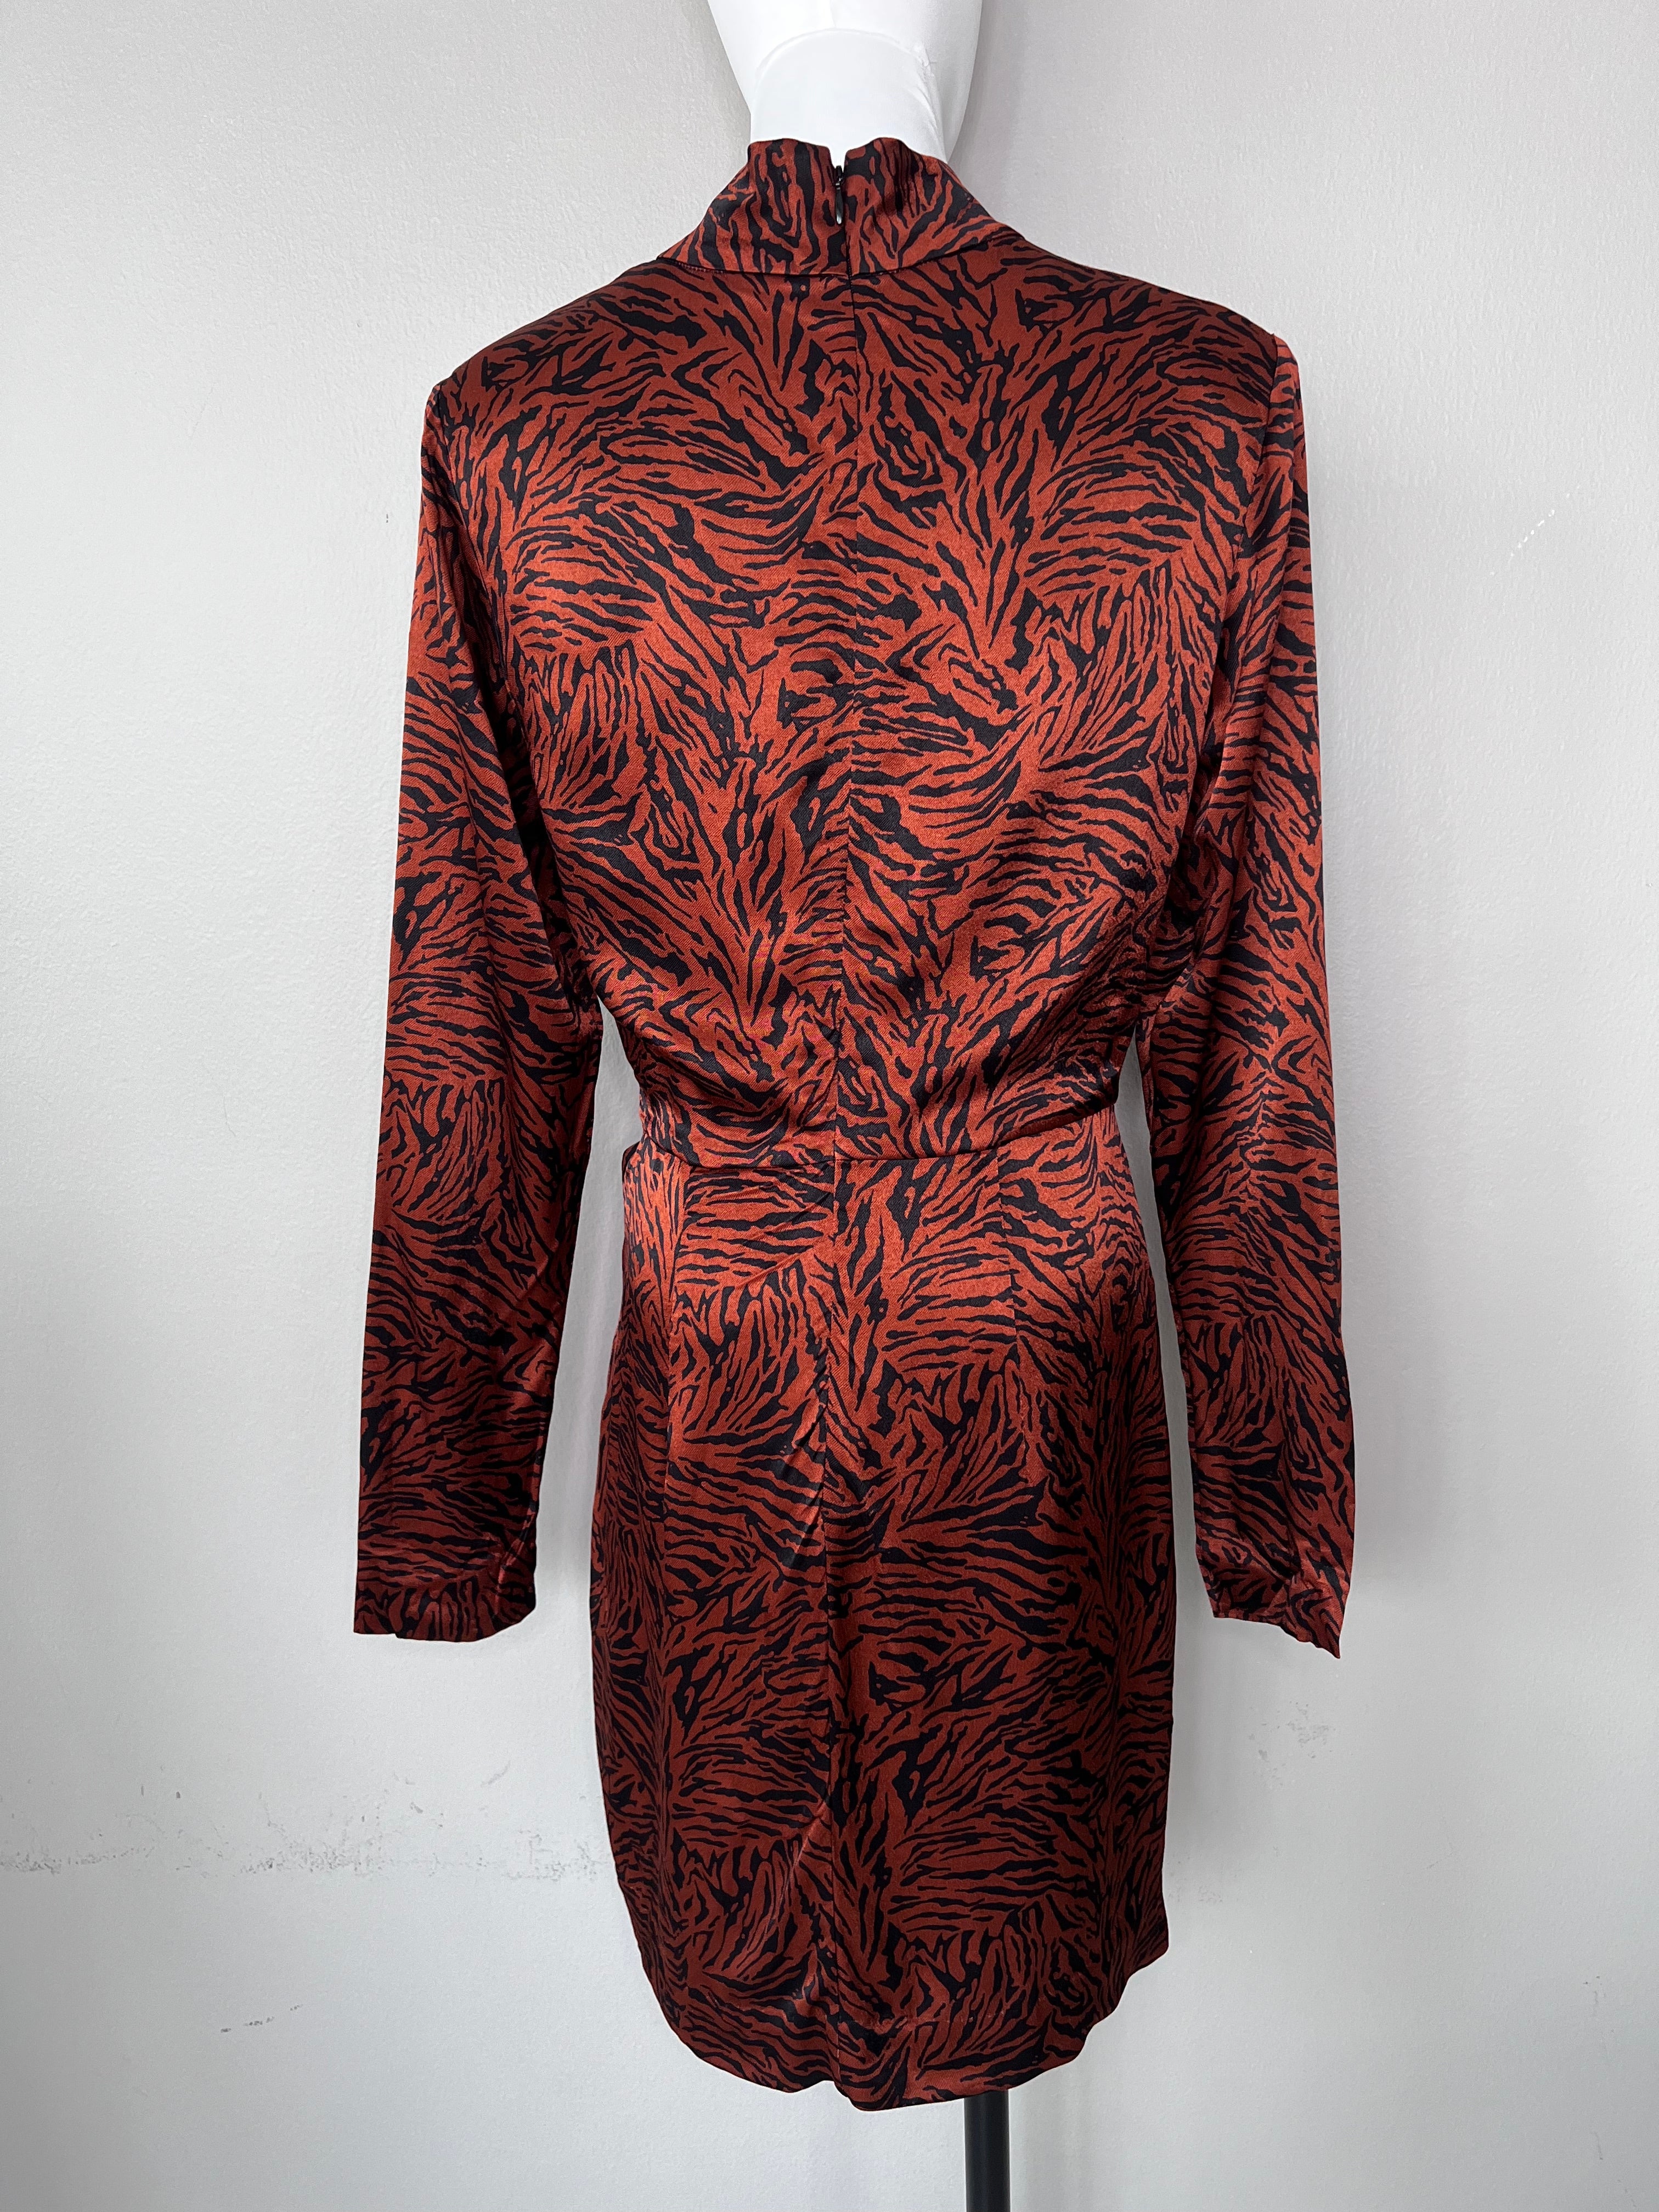 Tiger Print dress - LOS ANGELES ATELIER & OTHER STORIES